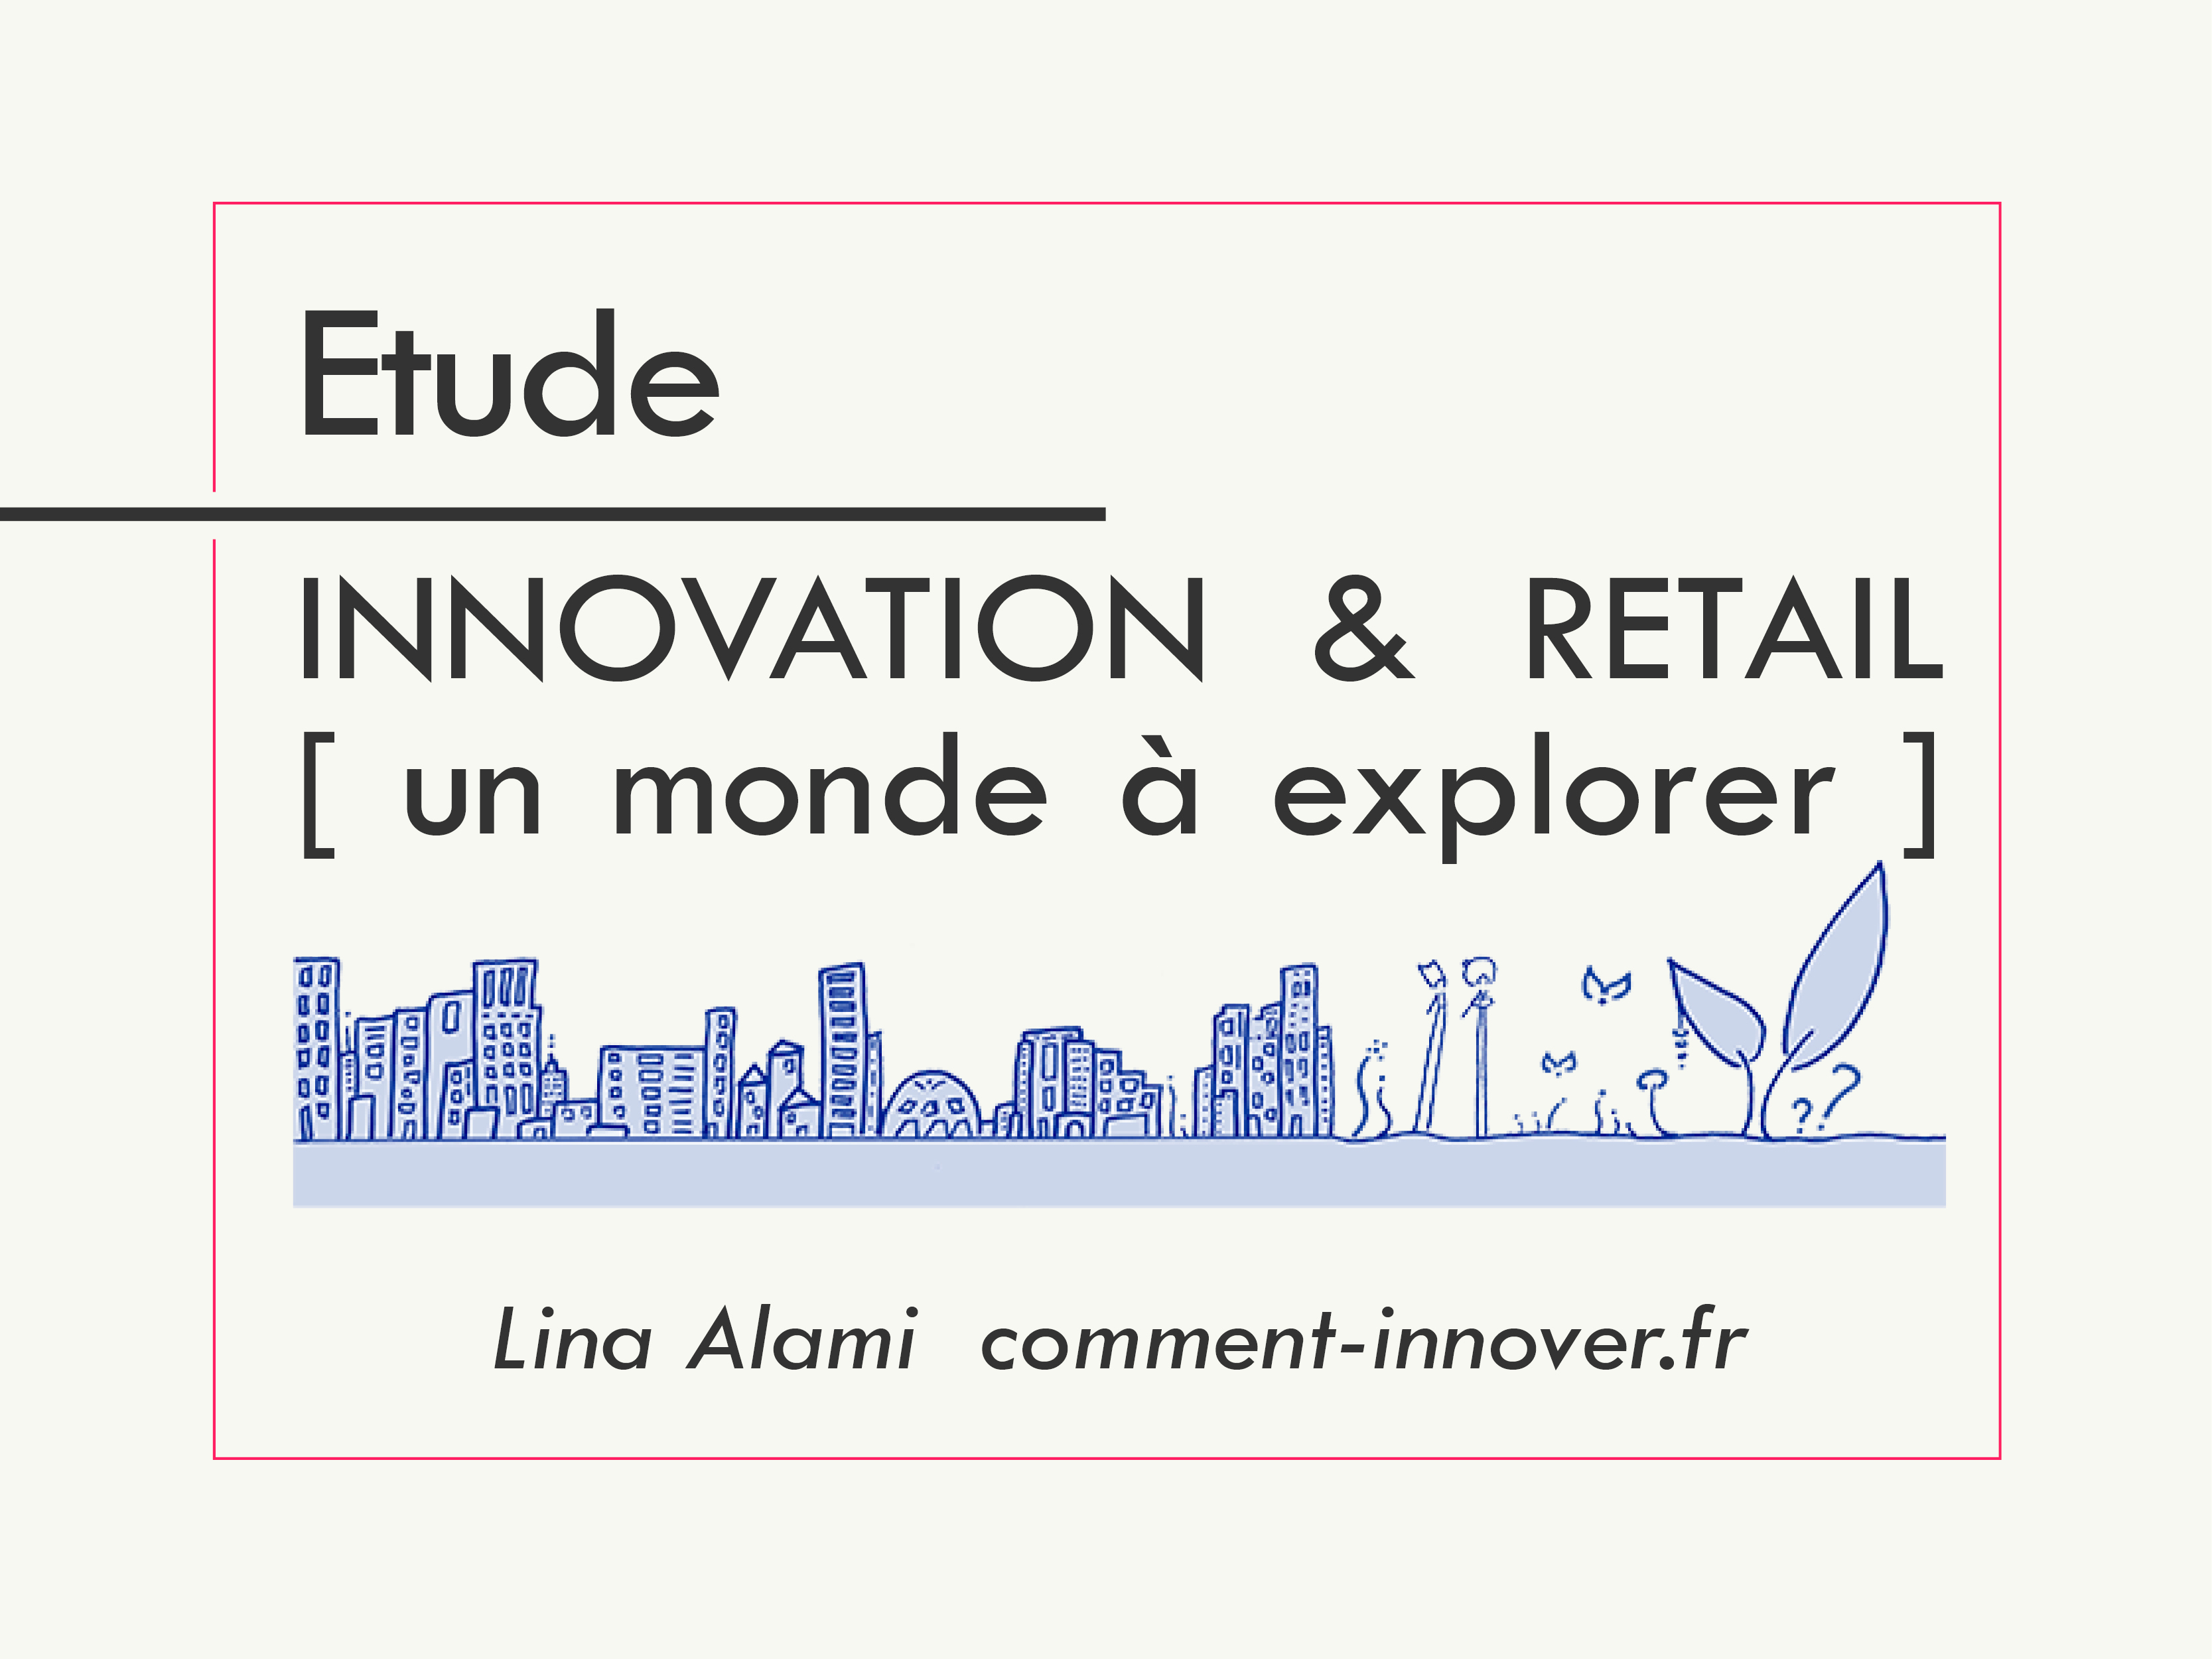 Etude innovation retail - comment innover - Lina Alami